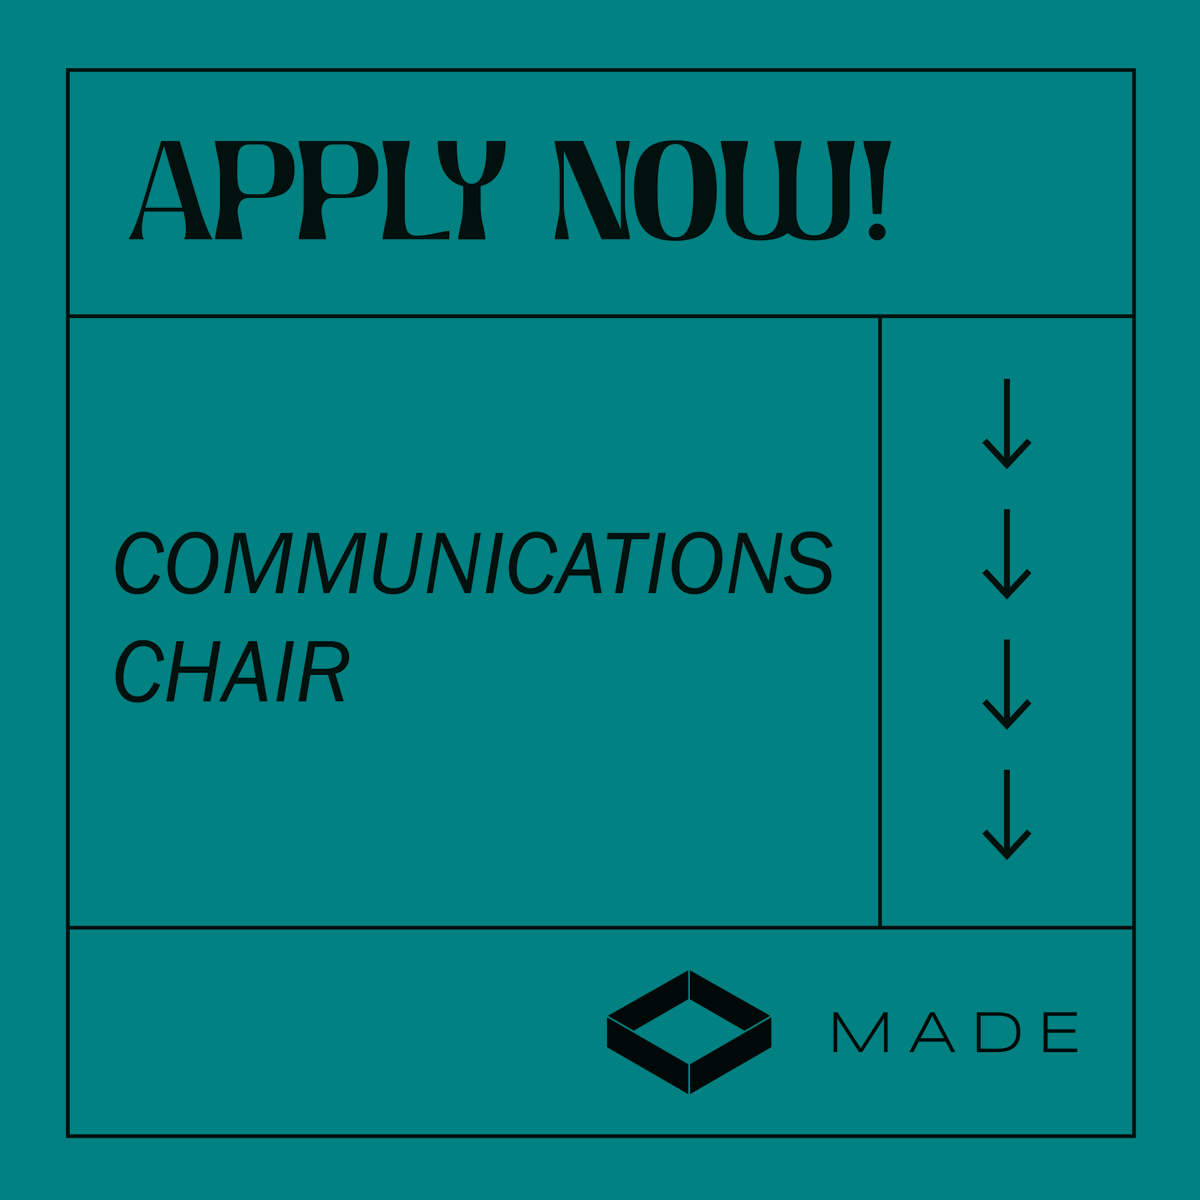 Want to expand your comms experience and get involved in #yeg's design community? Apply for our Comms Chair position! Find out more at joinmade.org/opportunities. If you’re interested, email us at info@joinmade.org by Feb 1. #YegArchitecture